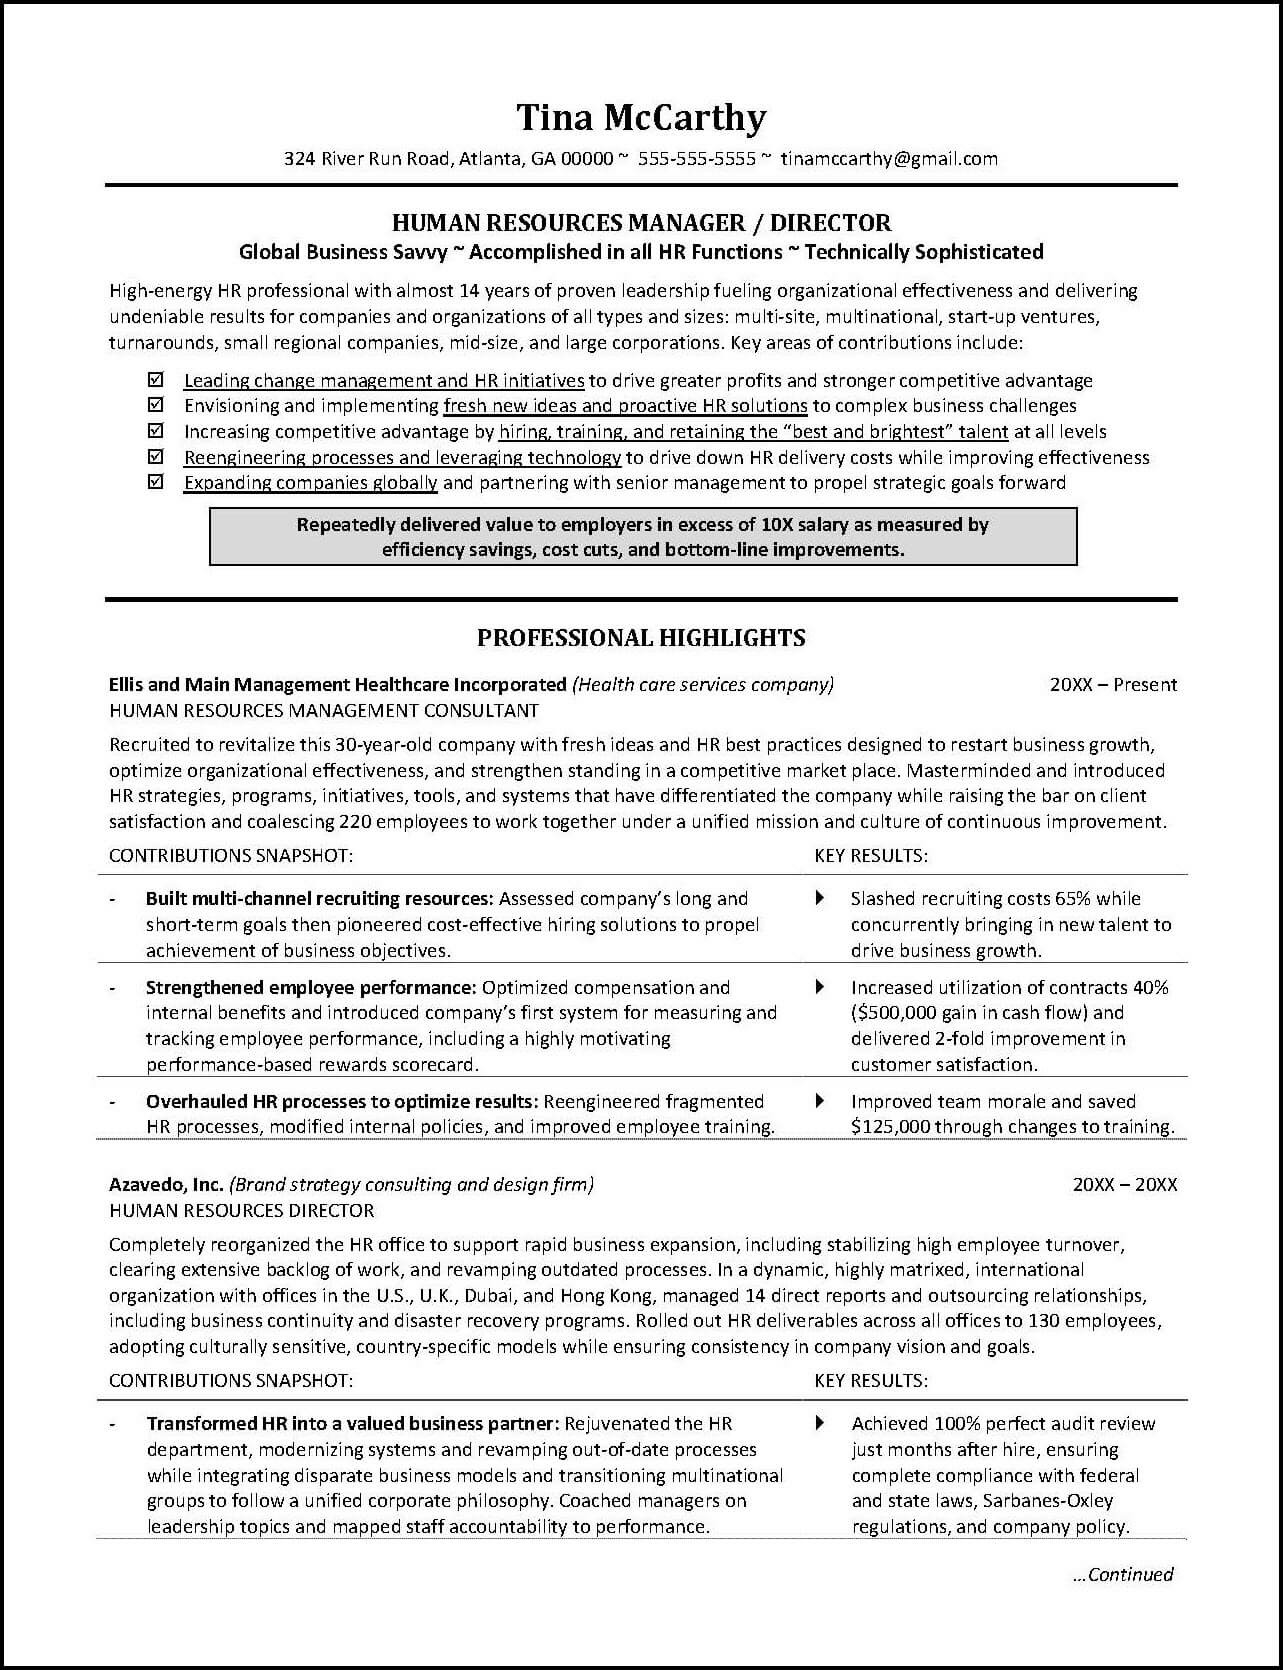 Sample Resume for Career Change to Human Resources Human Resources Resume Example – Distinctive Career Services